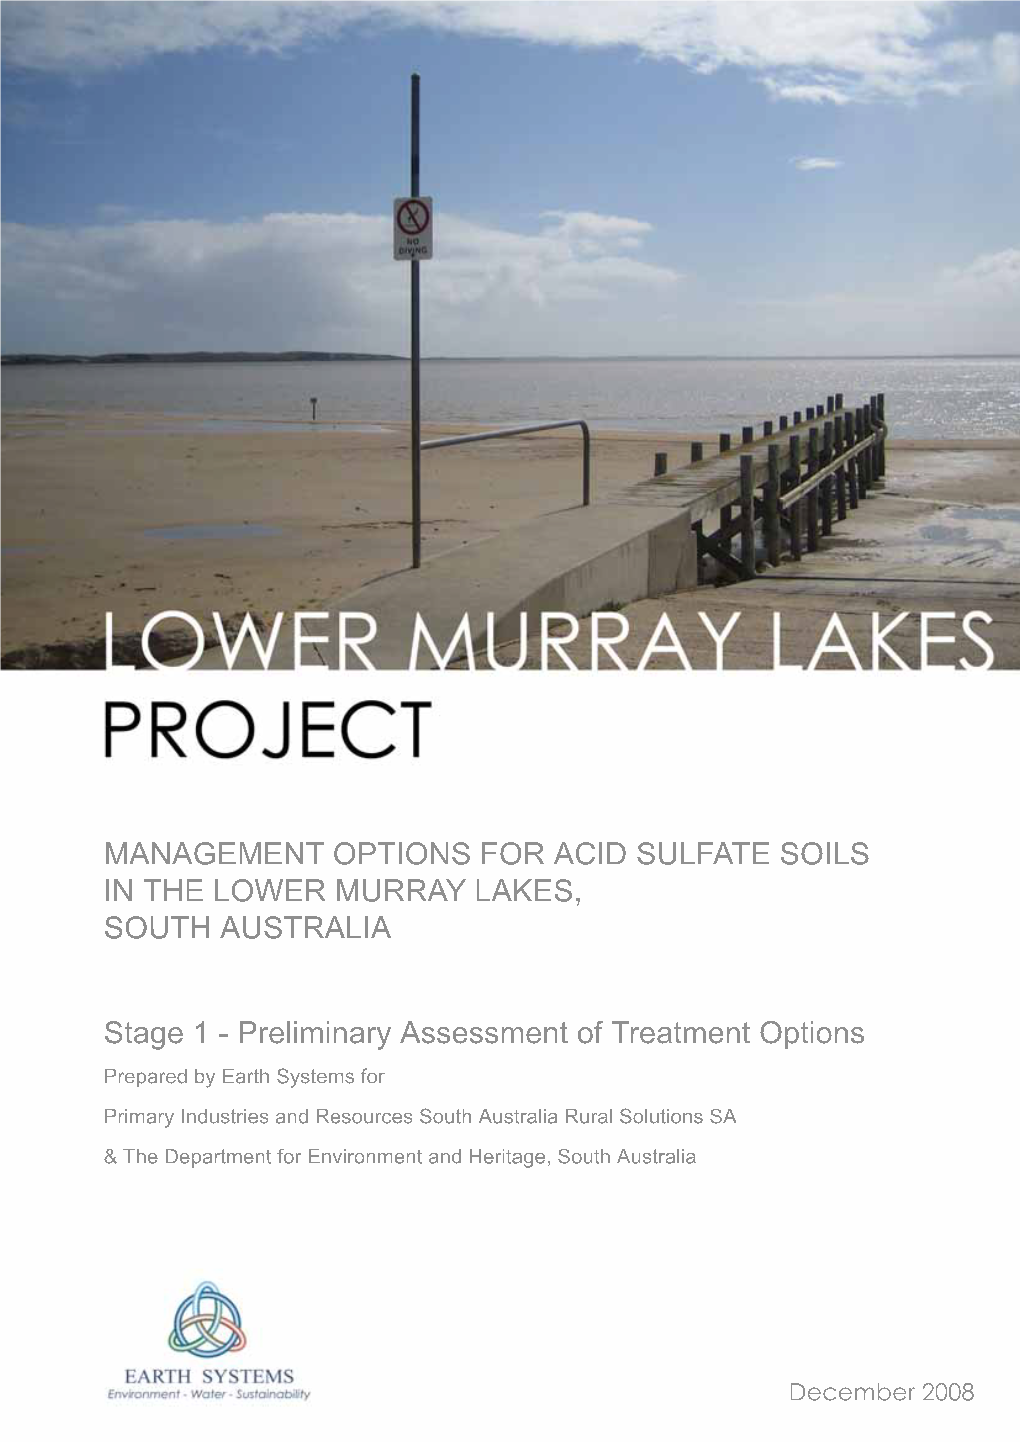 Management Options for Acid Sulfate Soils in the Lower Murray Lakes, South Australia